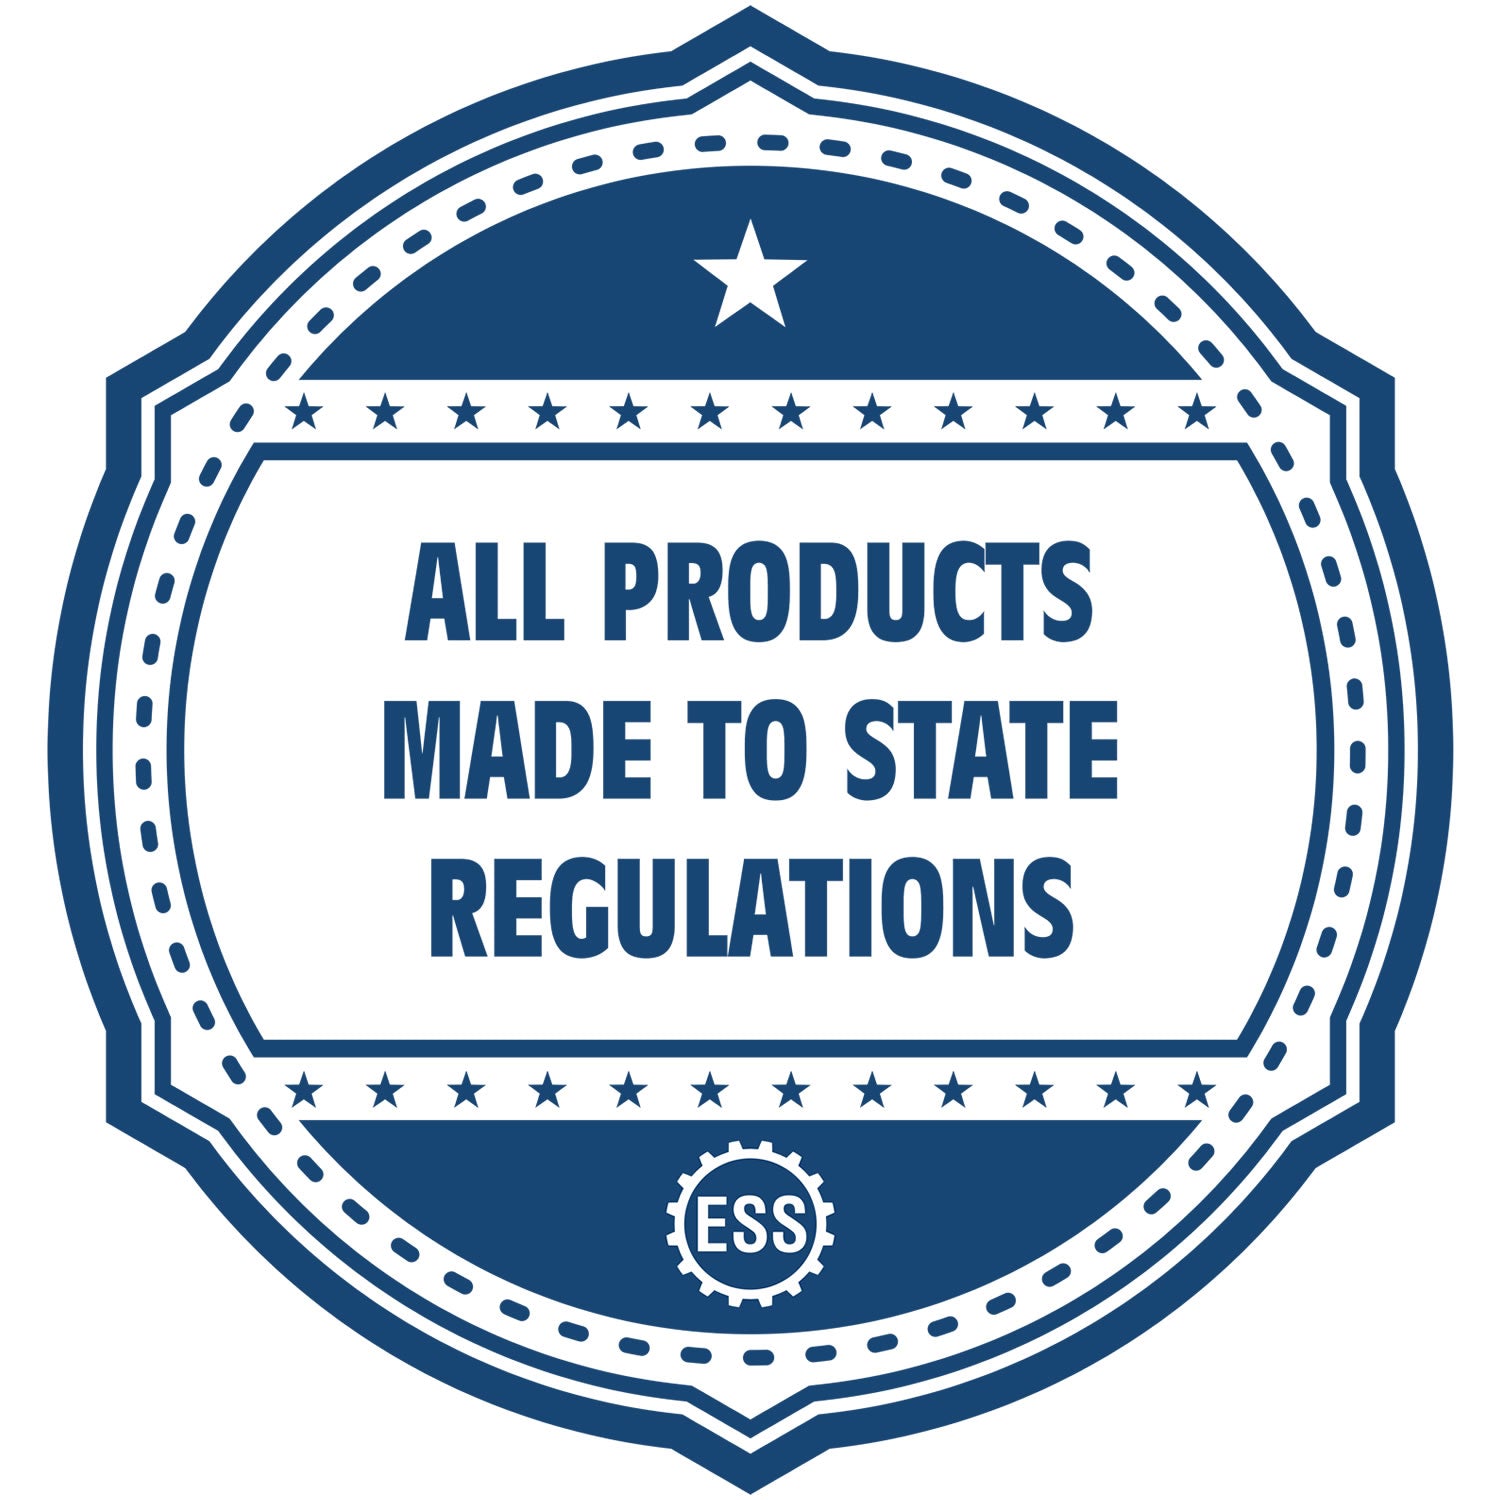 An icon or badge element for the Tennessee Desk Landscape Architectural Seal Embosser showing that this product is made in compliance with state regulations.